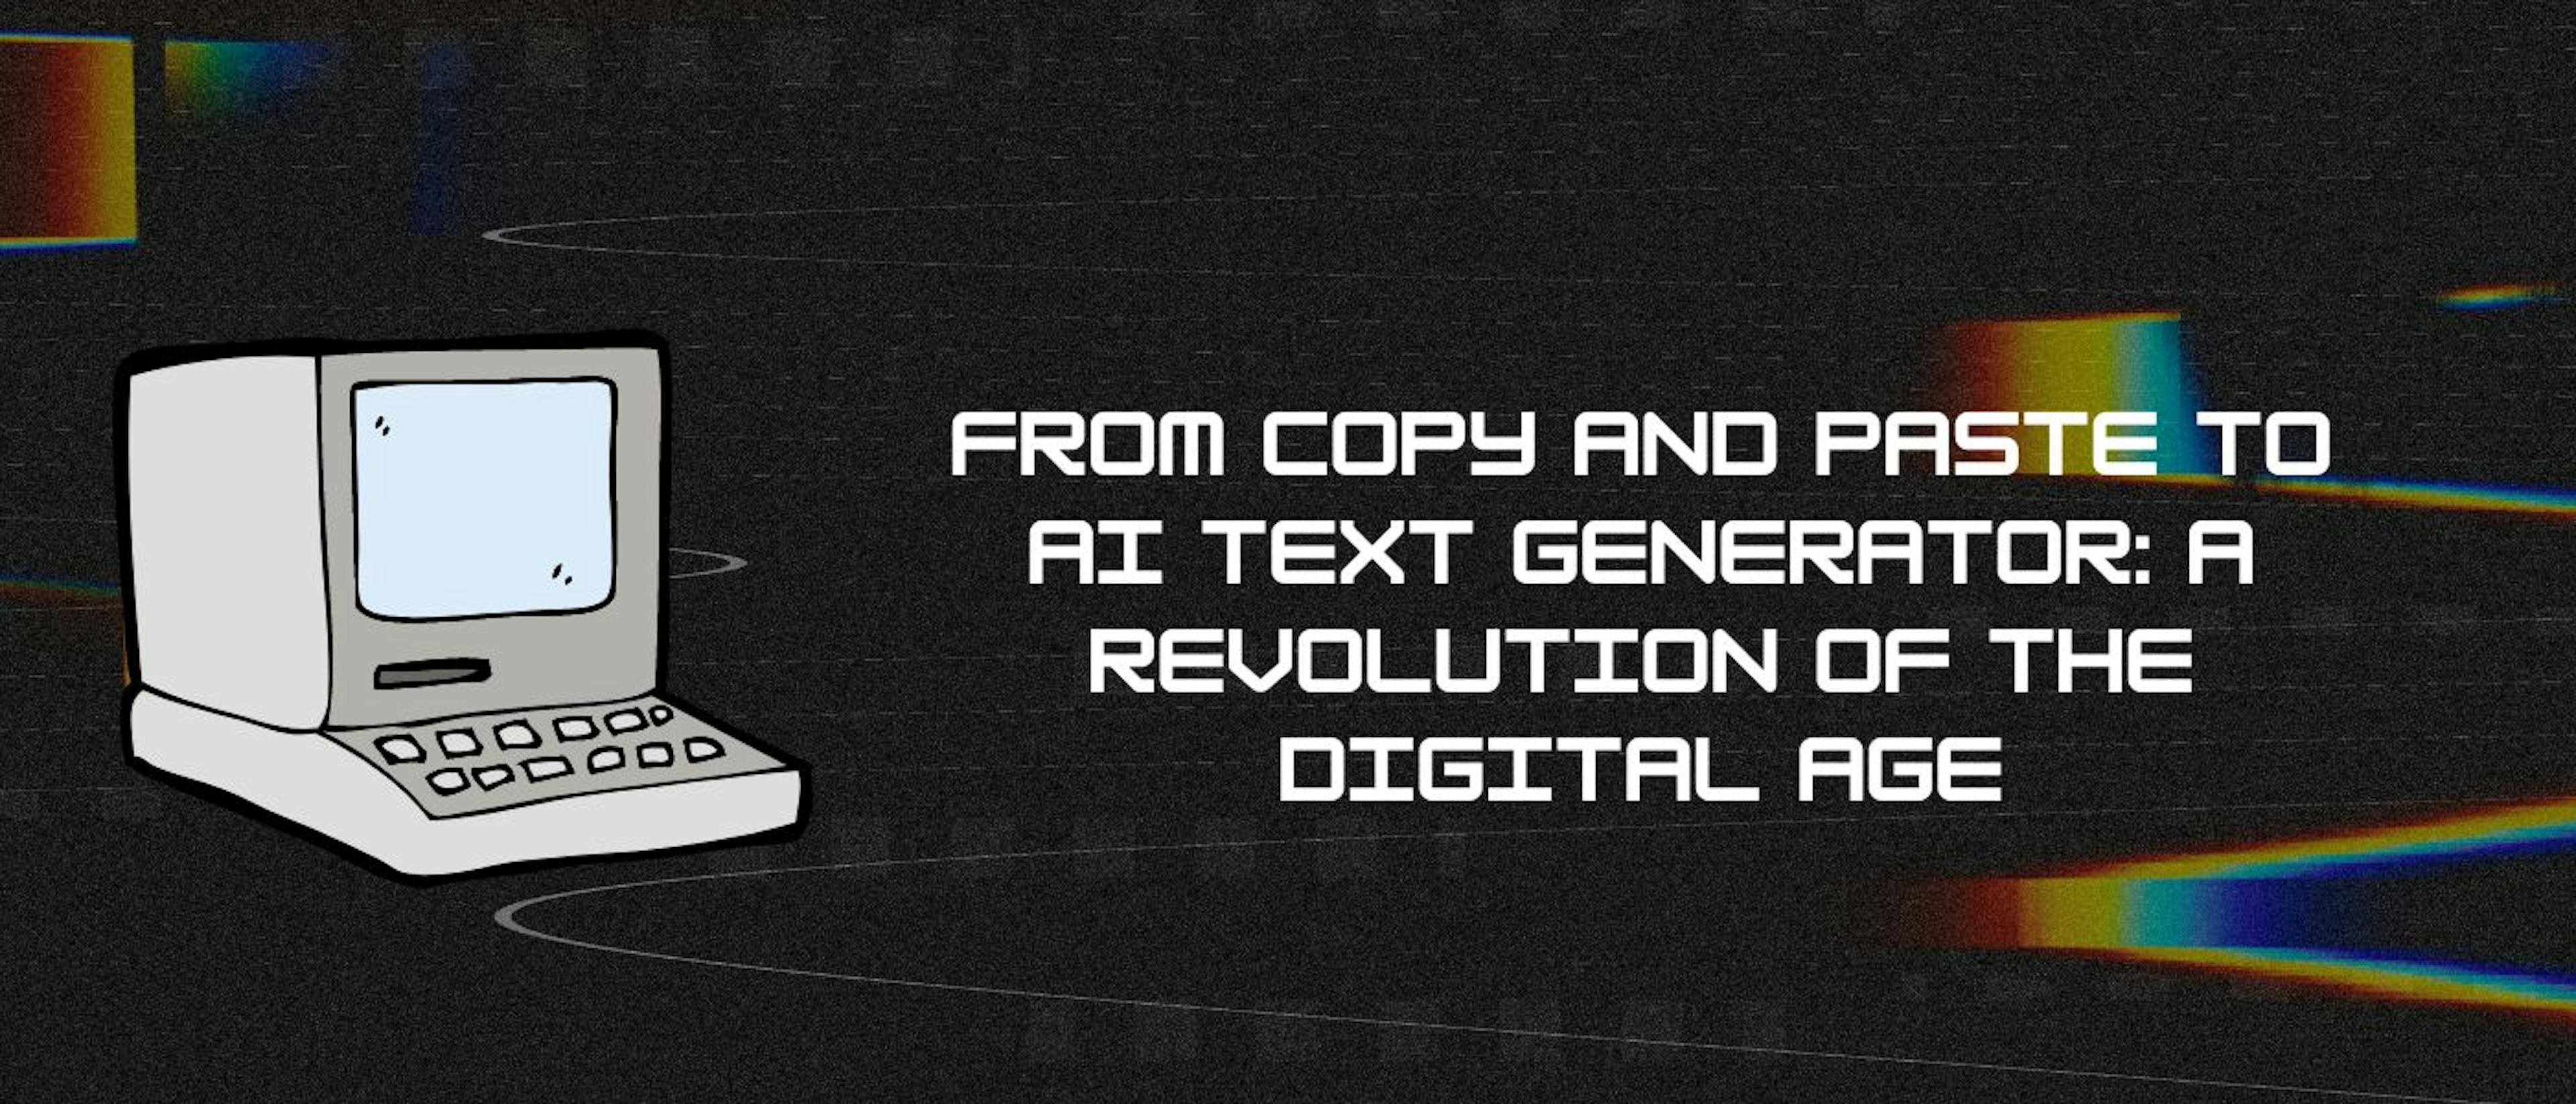 featured image - From Copy and Paste to AI Text Generator: A Revolution of the Digital Age